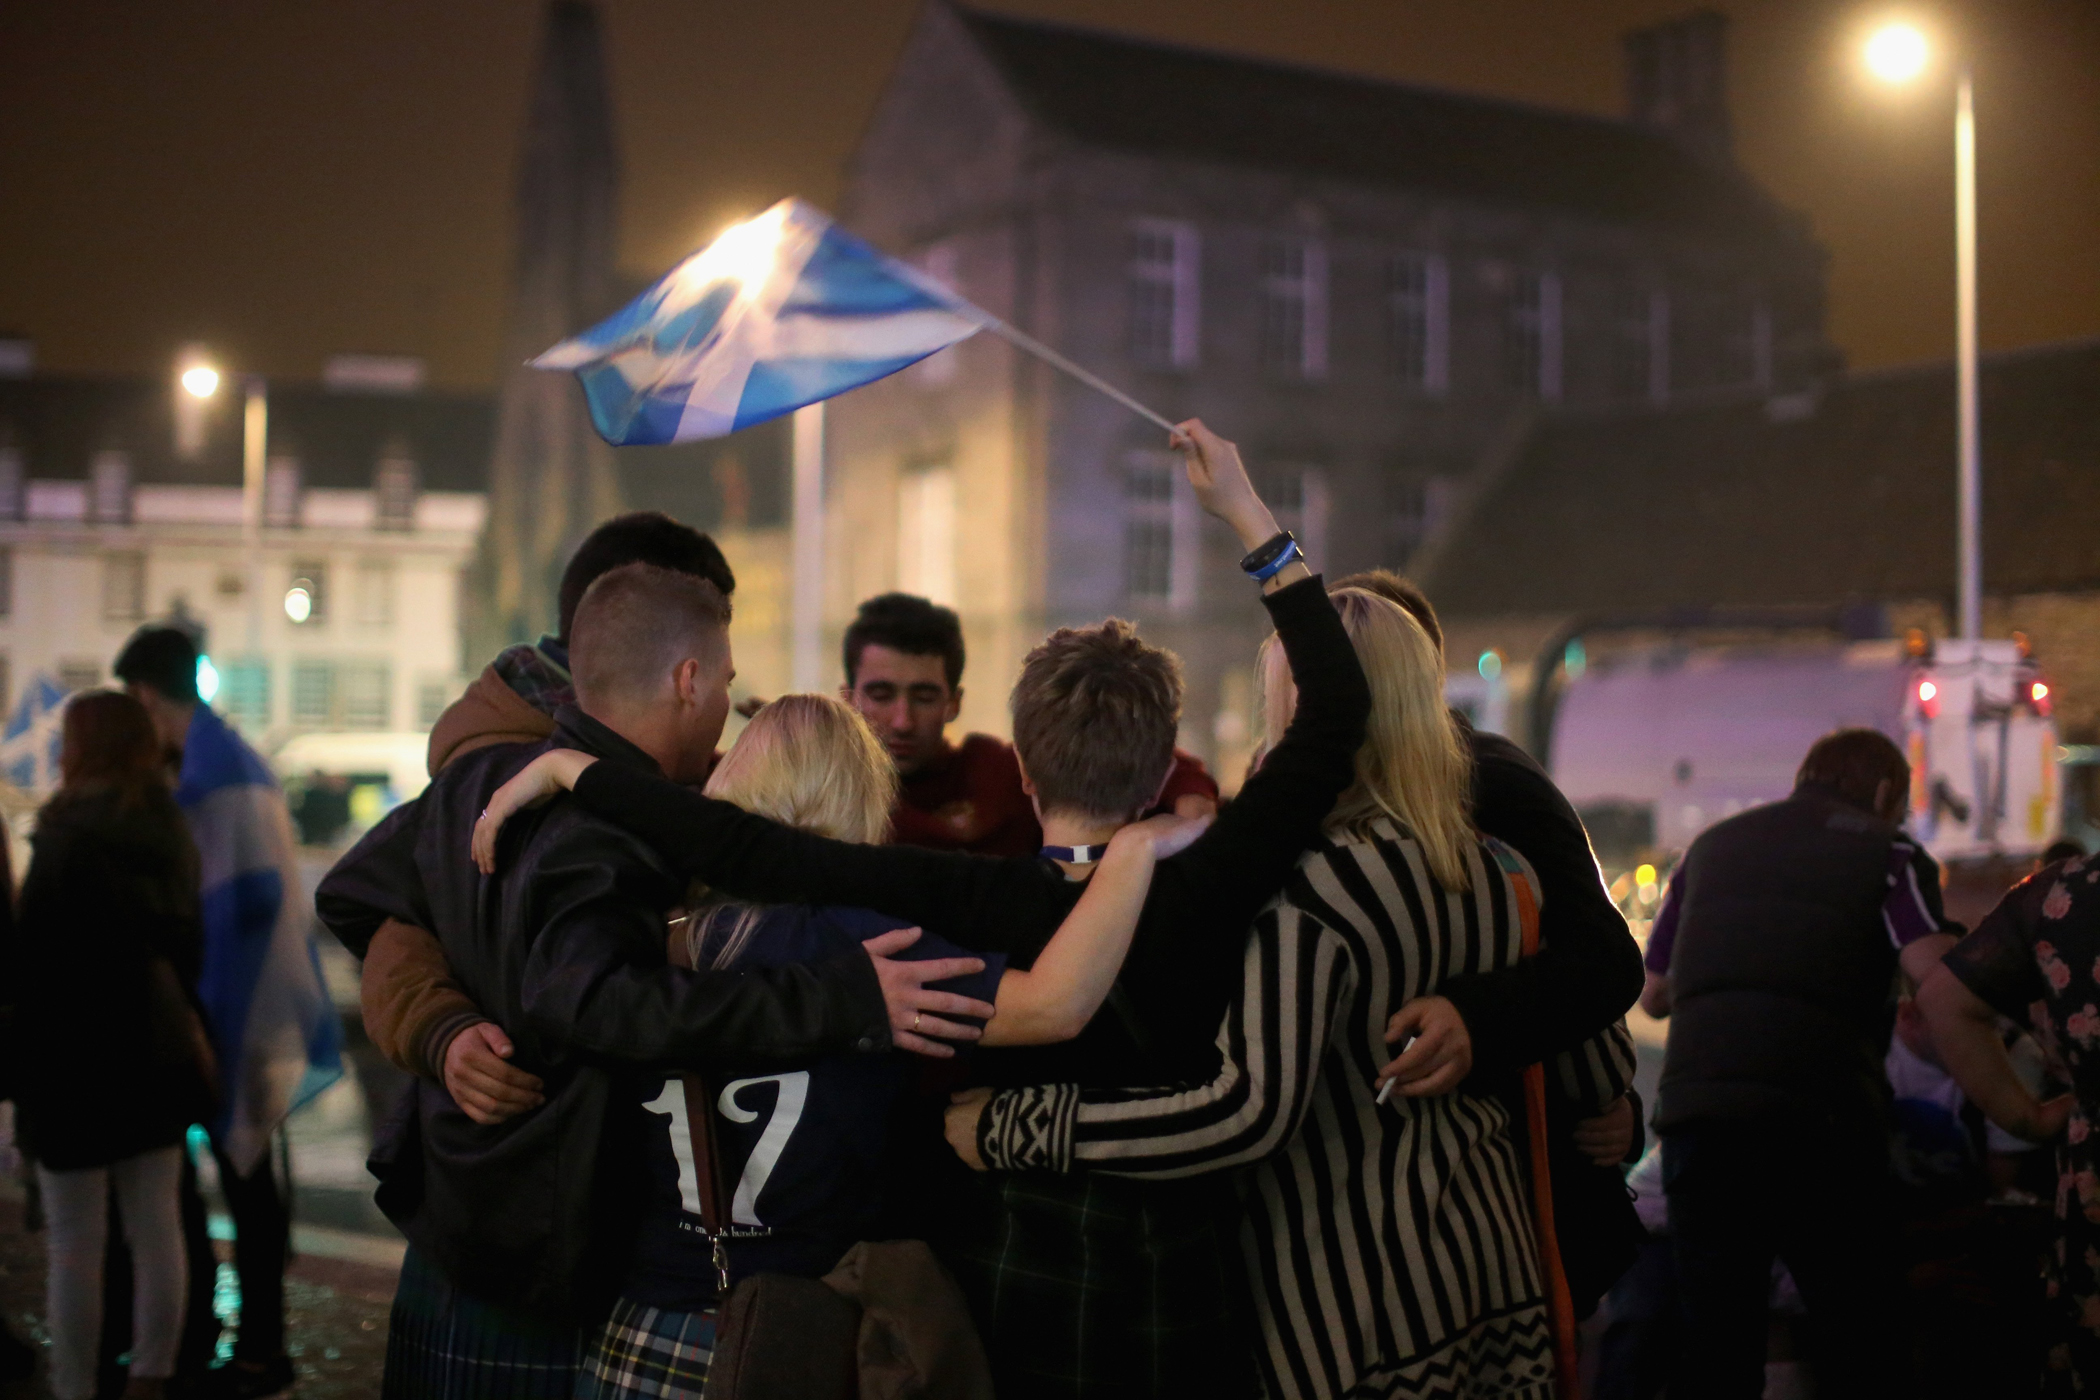 Yes vote campaigners console themselves outside the Scottish Parliament building after the people of Scotland voted no to independence on Sept. 19, 2014 in Edinburgh, Scotland. (Christopher Furlong—Getty Images)